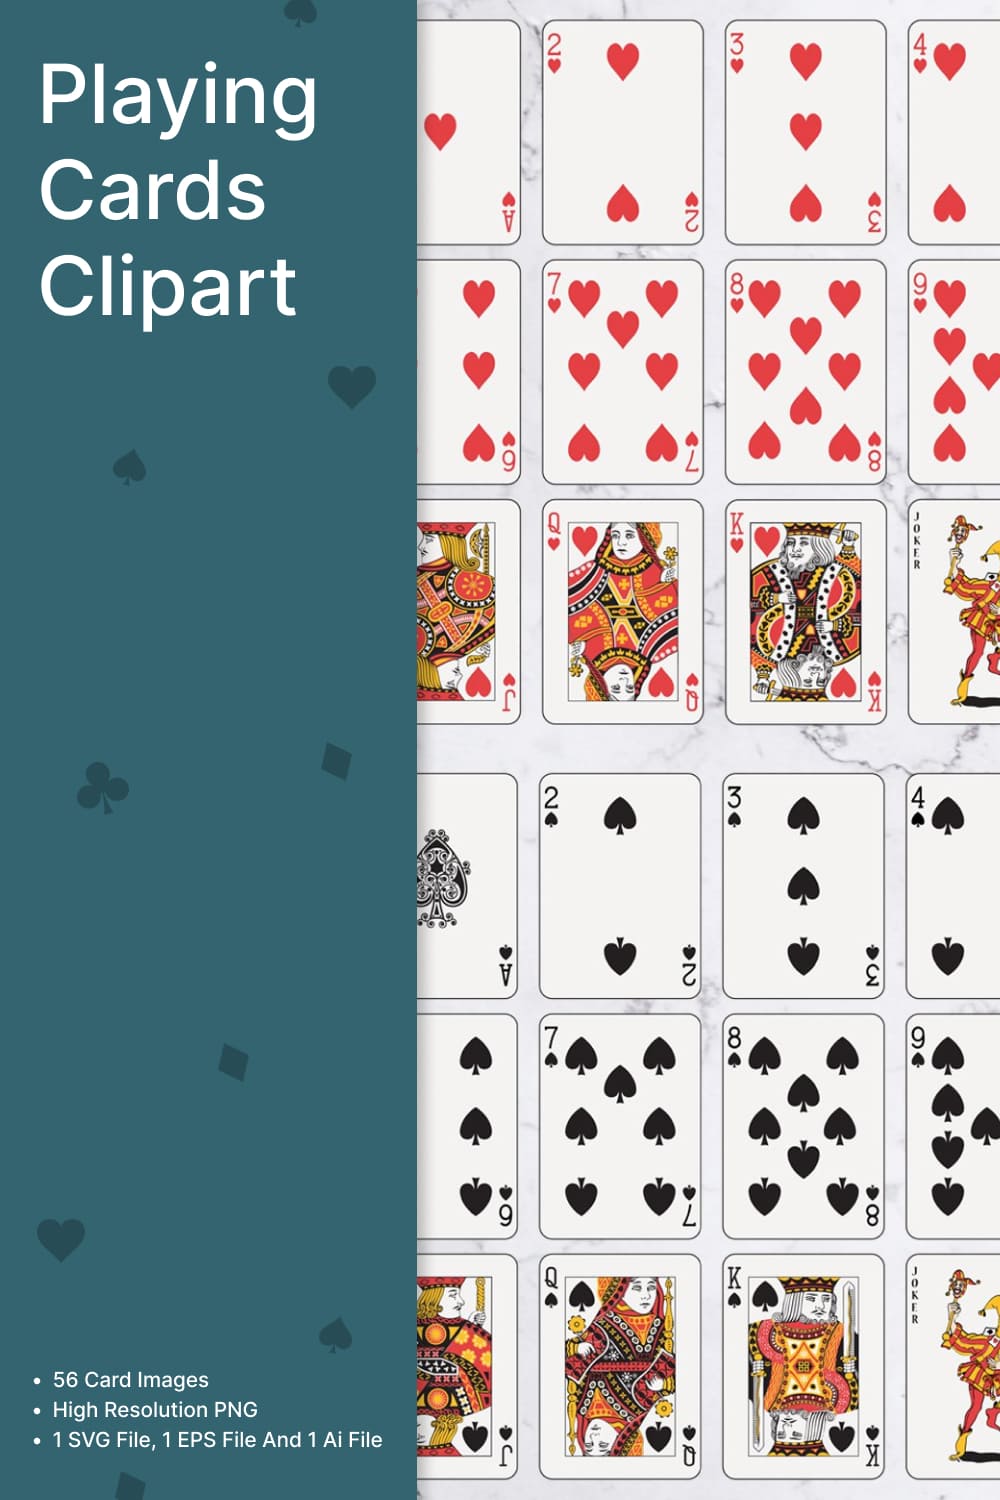 Playing cards clipart - pinterest image preview.